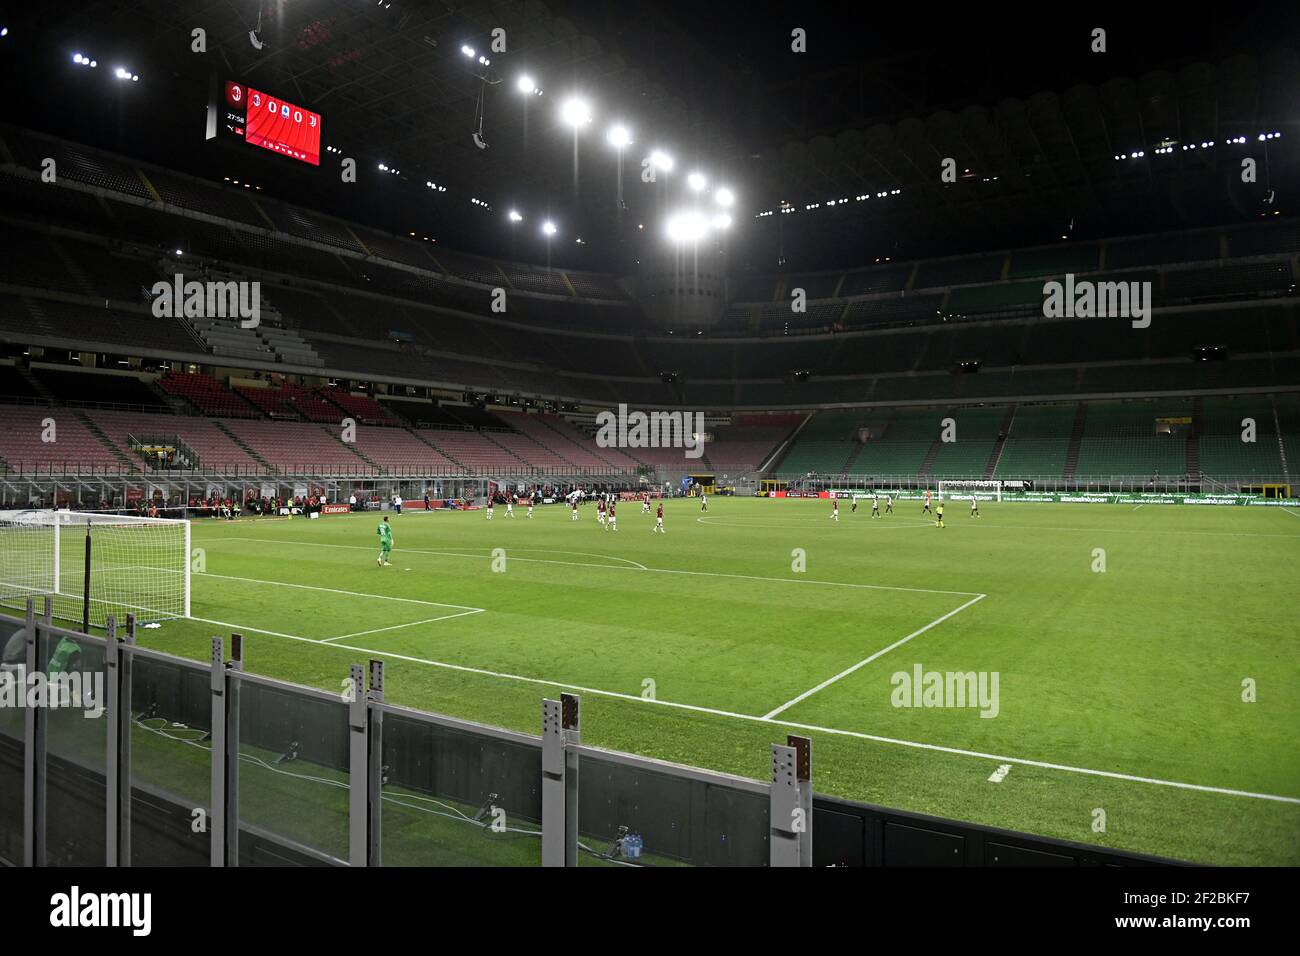 Professional Italian Serie A football match played in an empty Giuseppe Meazza's stadium, due to the Covid-19 healthy rules, in Milan.Italy. Stock Photo